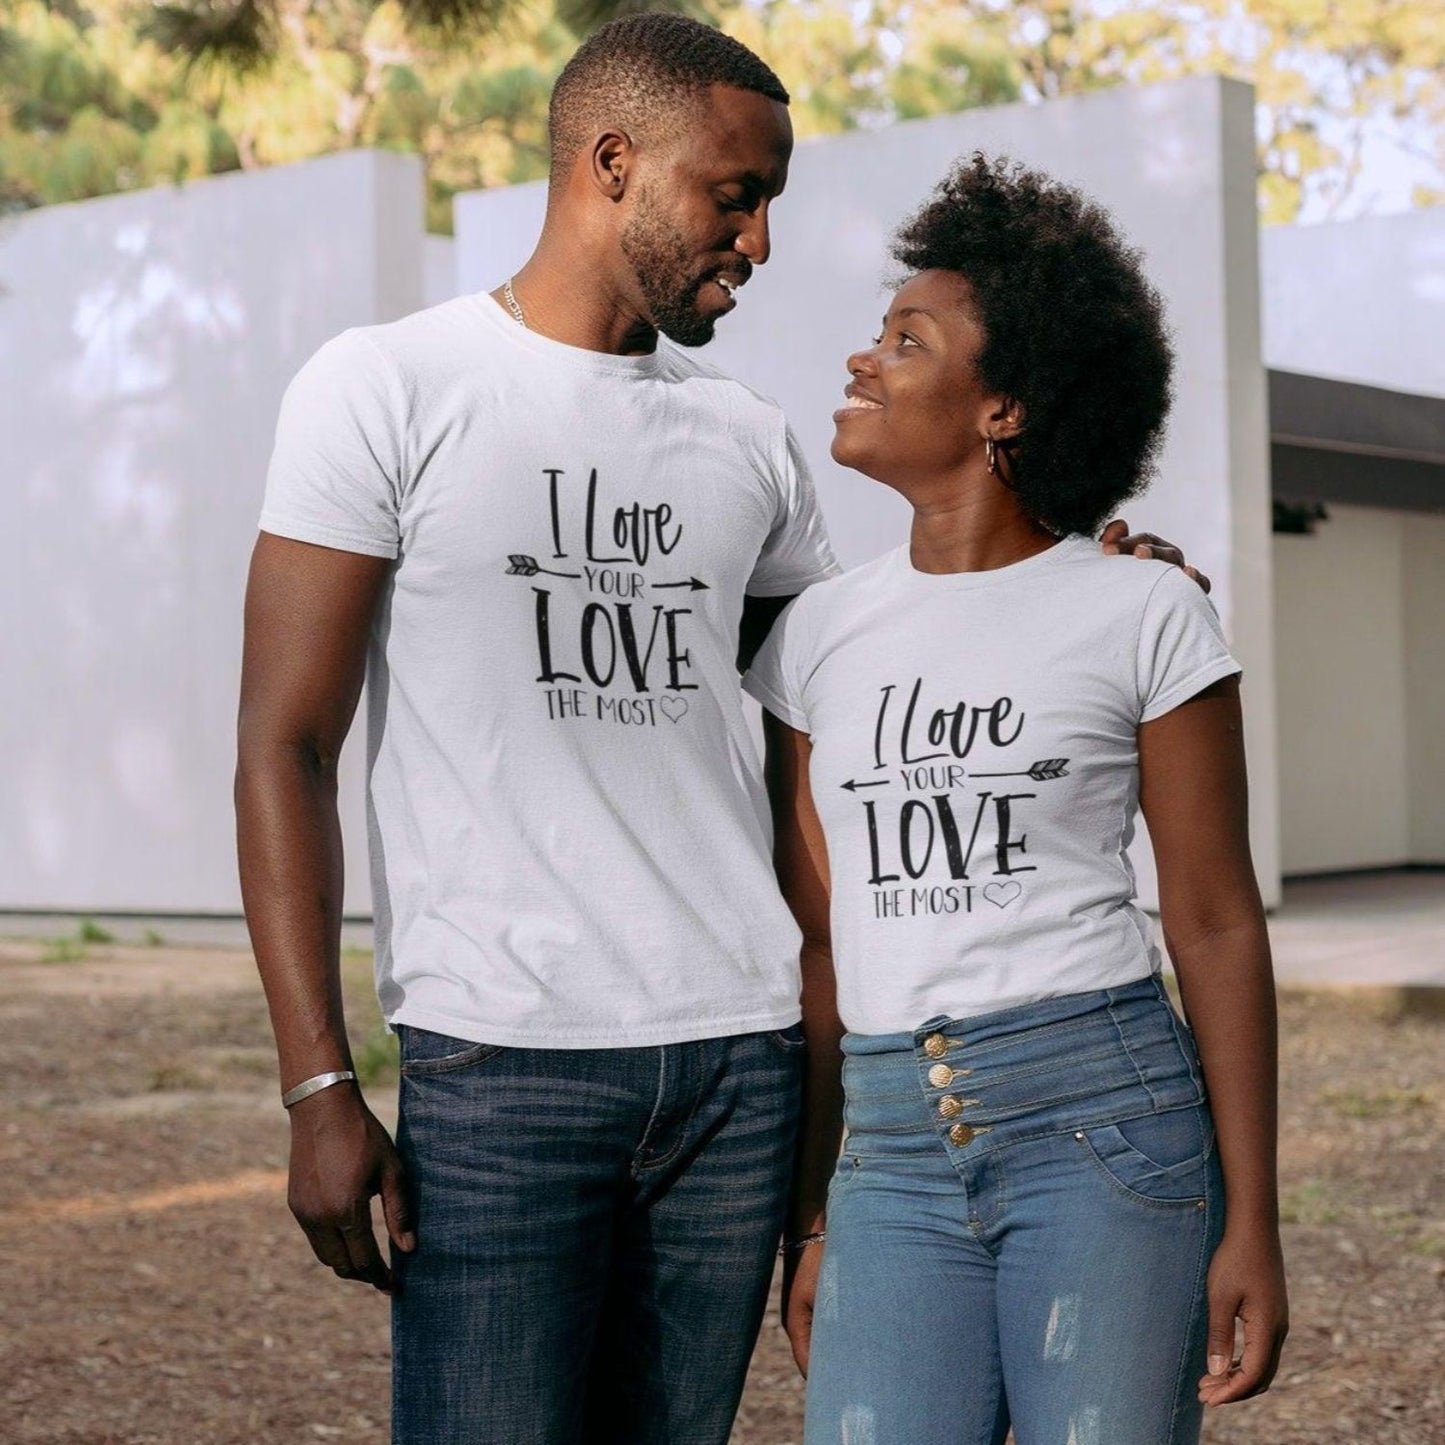 Charming "I Love Your Love The Most" Matching Outfits for Couples - Ideal Valentine's Gift Set